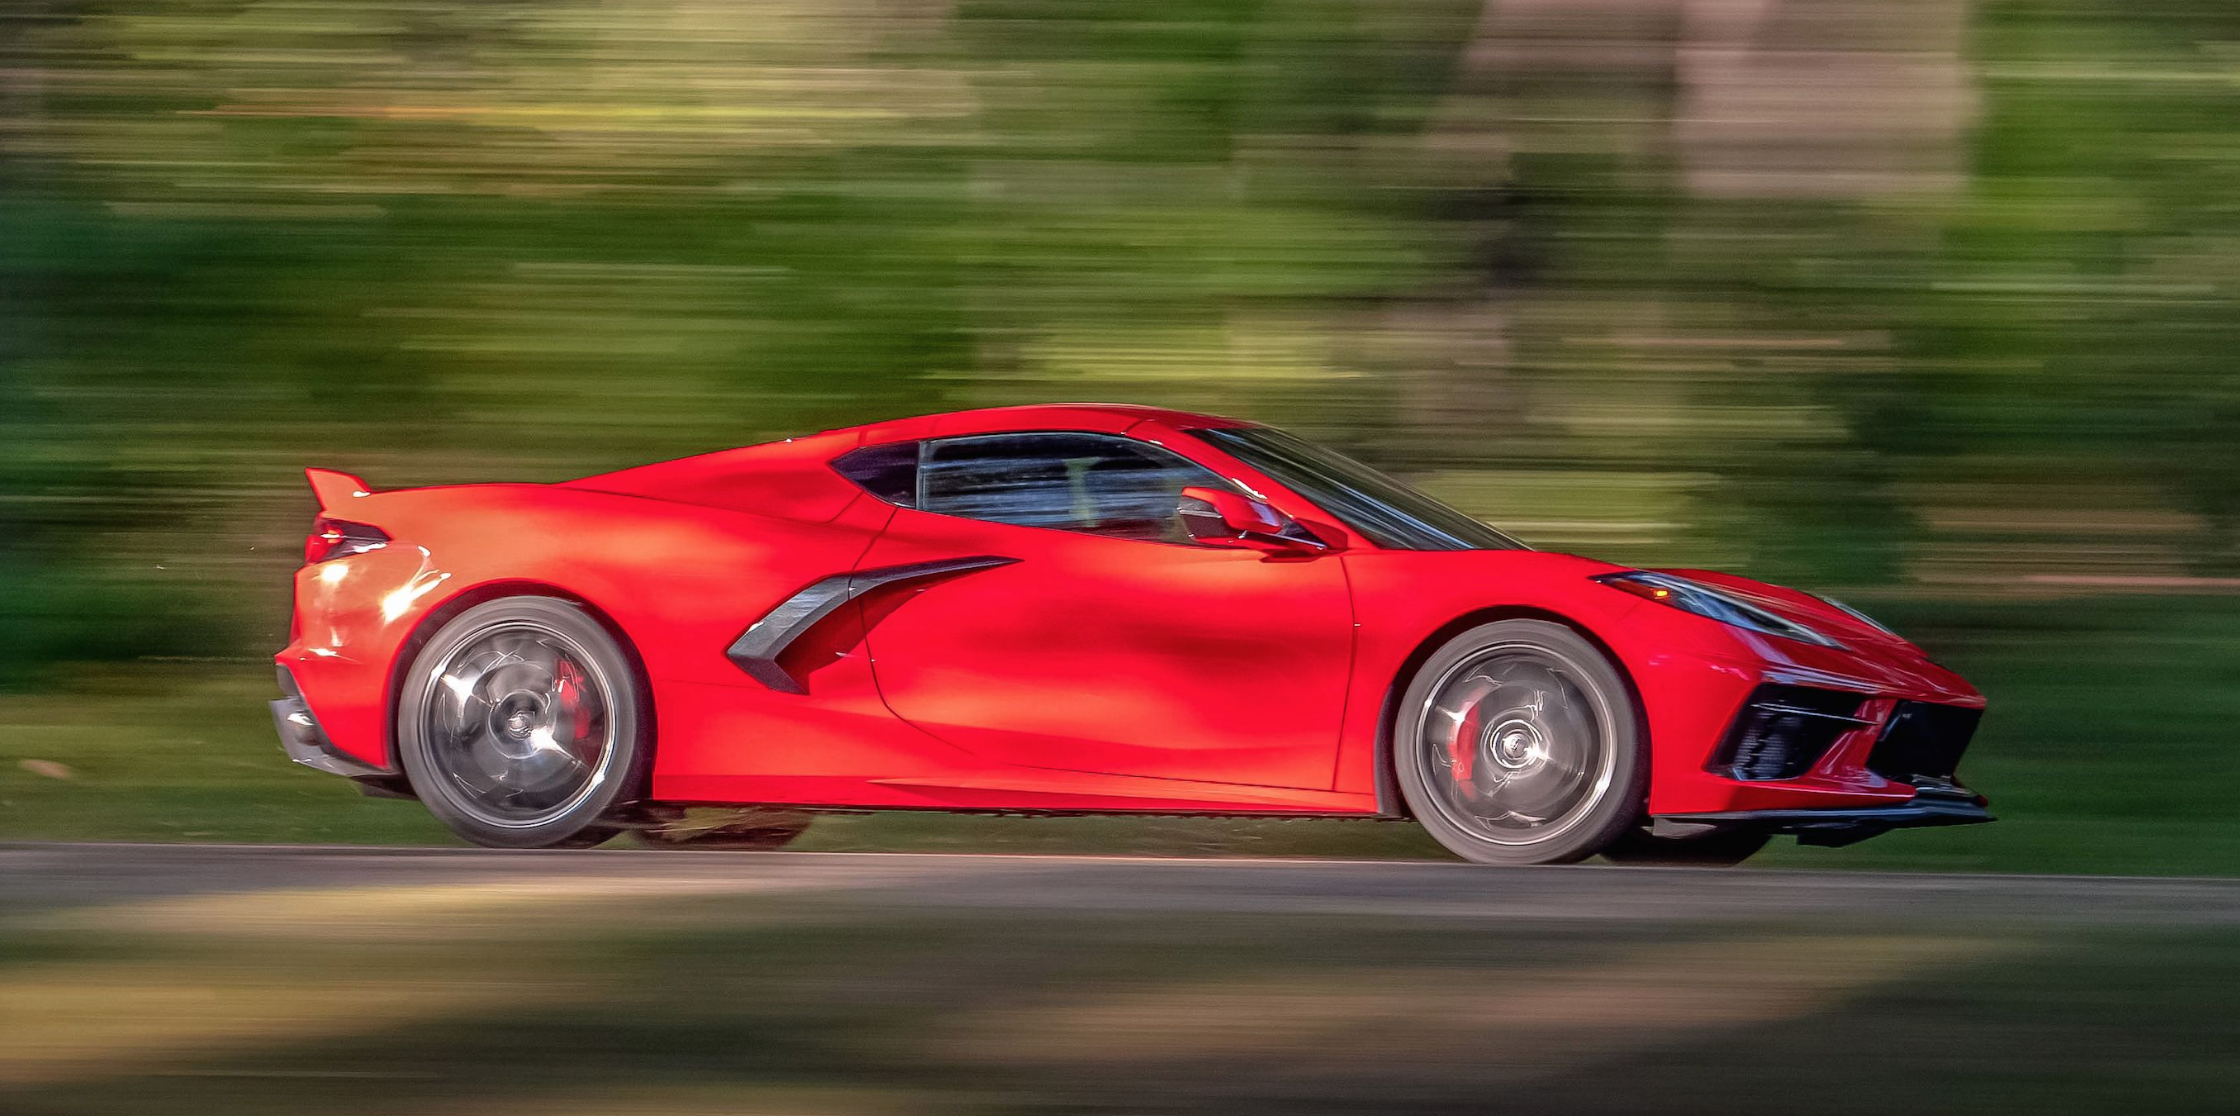 chevy s 2020 corvette will get 27 mpg on the highway chevy s 2020 corvette will get 27 mpg